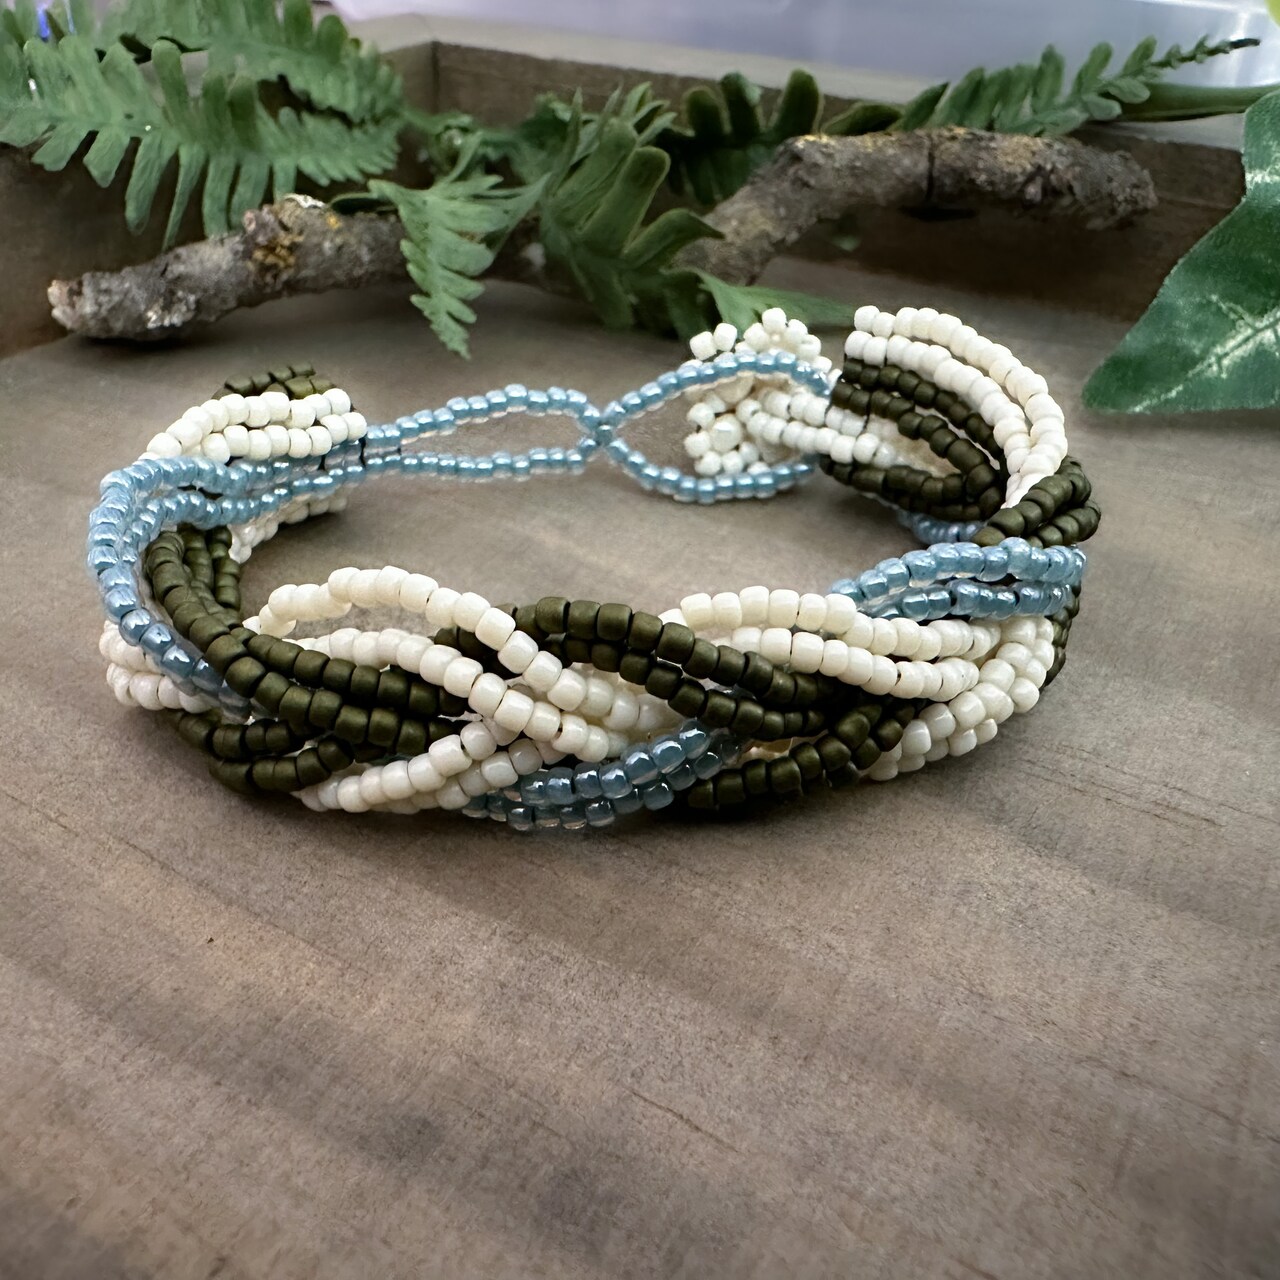 Seed Beaded Braided Bracelet with Danielle Wickes - Free Online